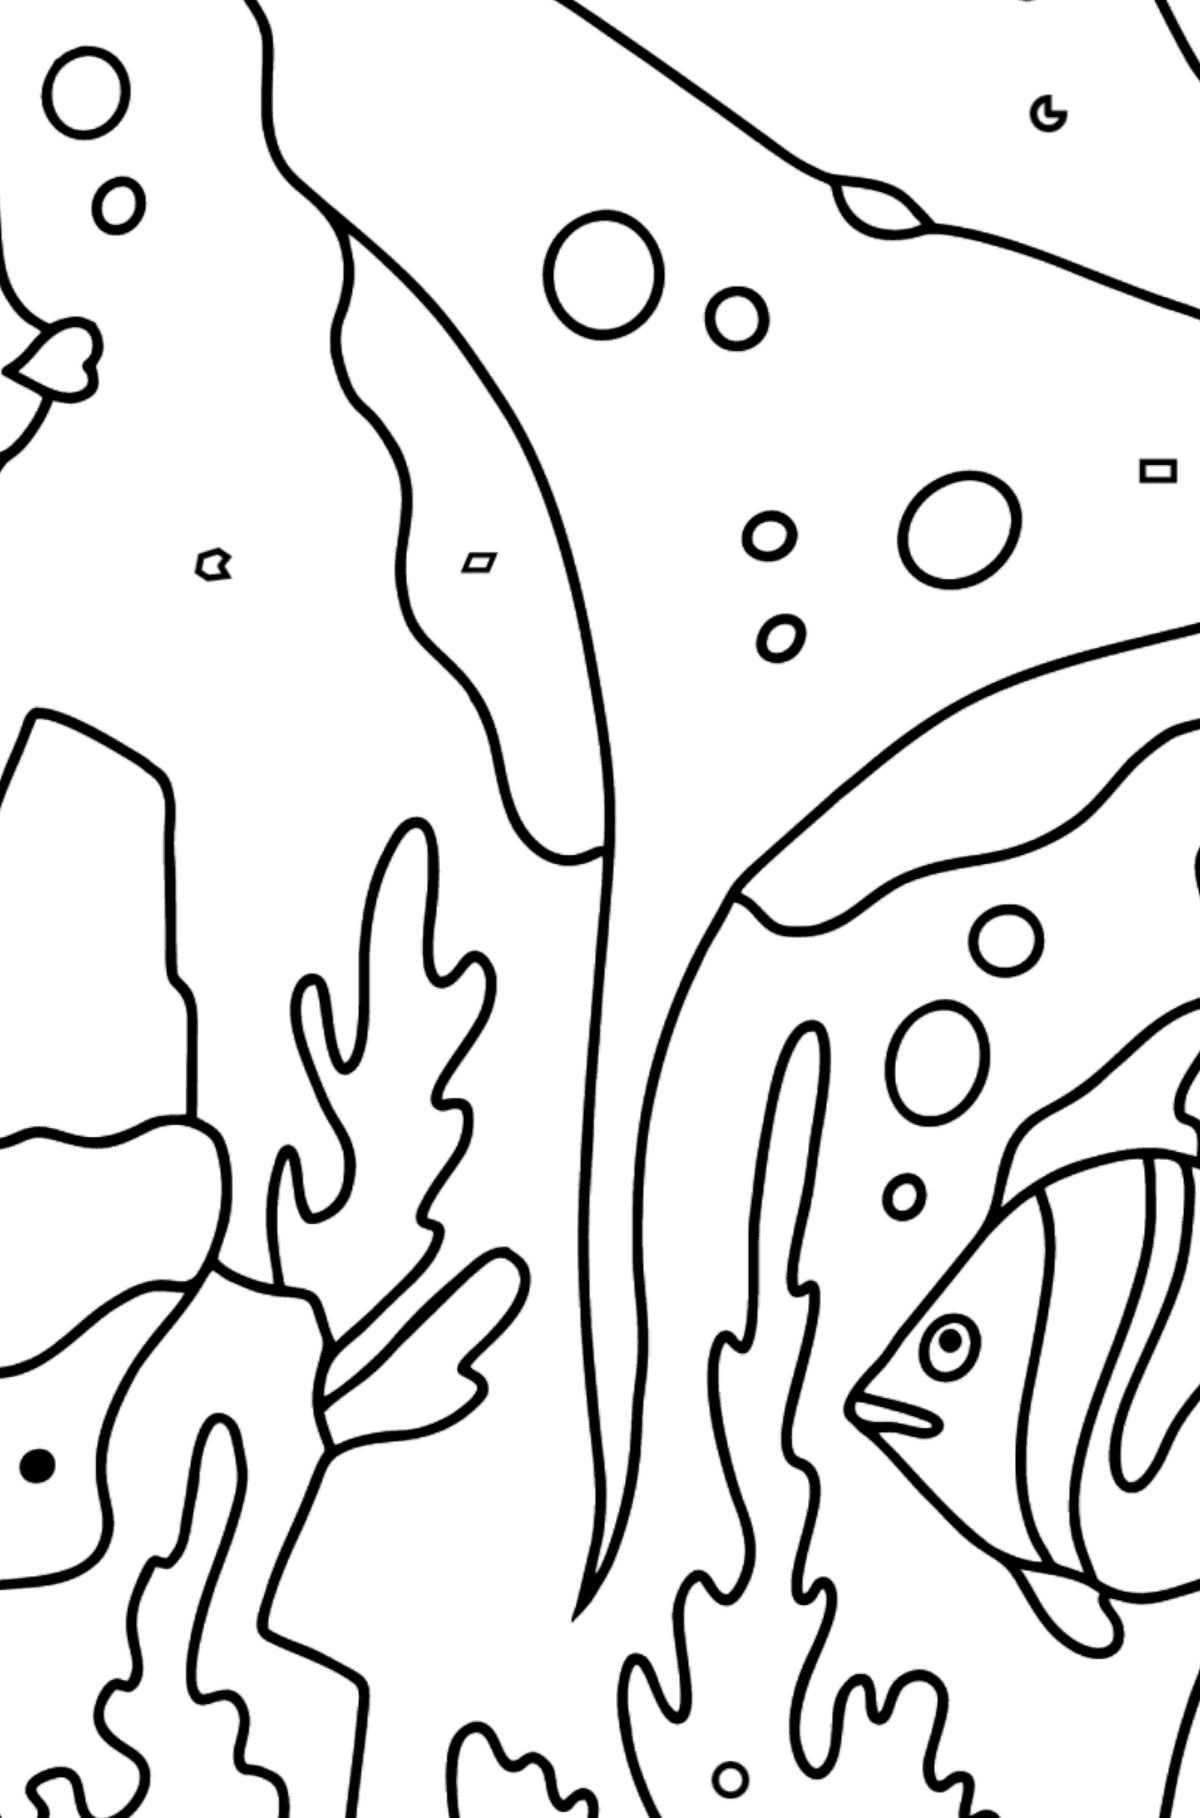 Coloring Page - Fish are Playing with a Charming Stingray - Coloring by Geometric Shapes for Kids